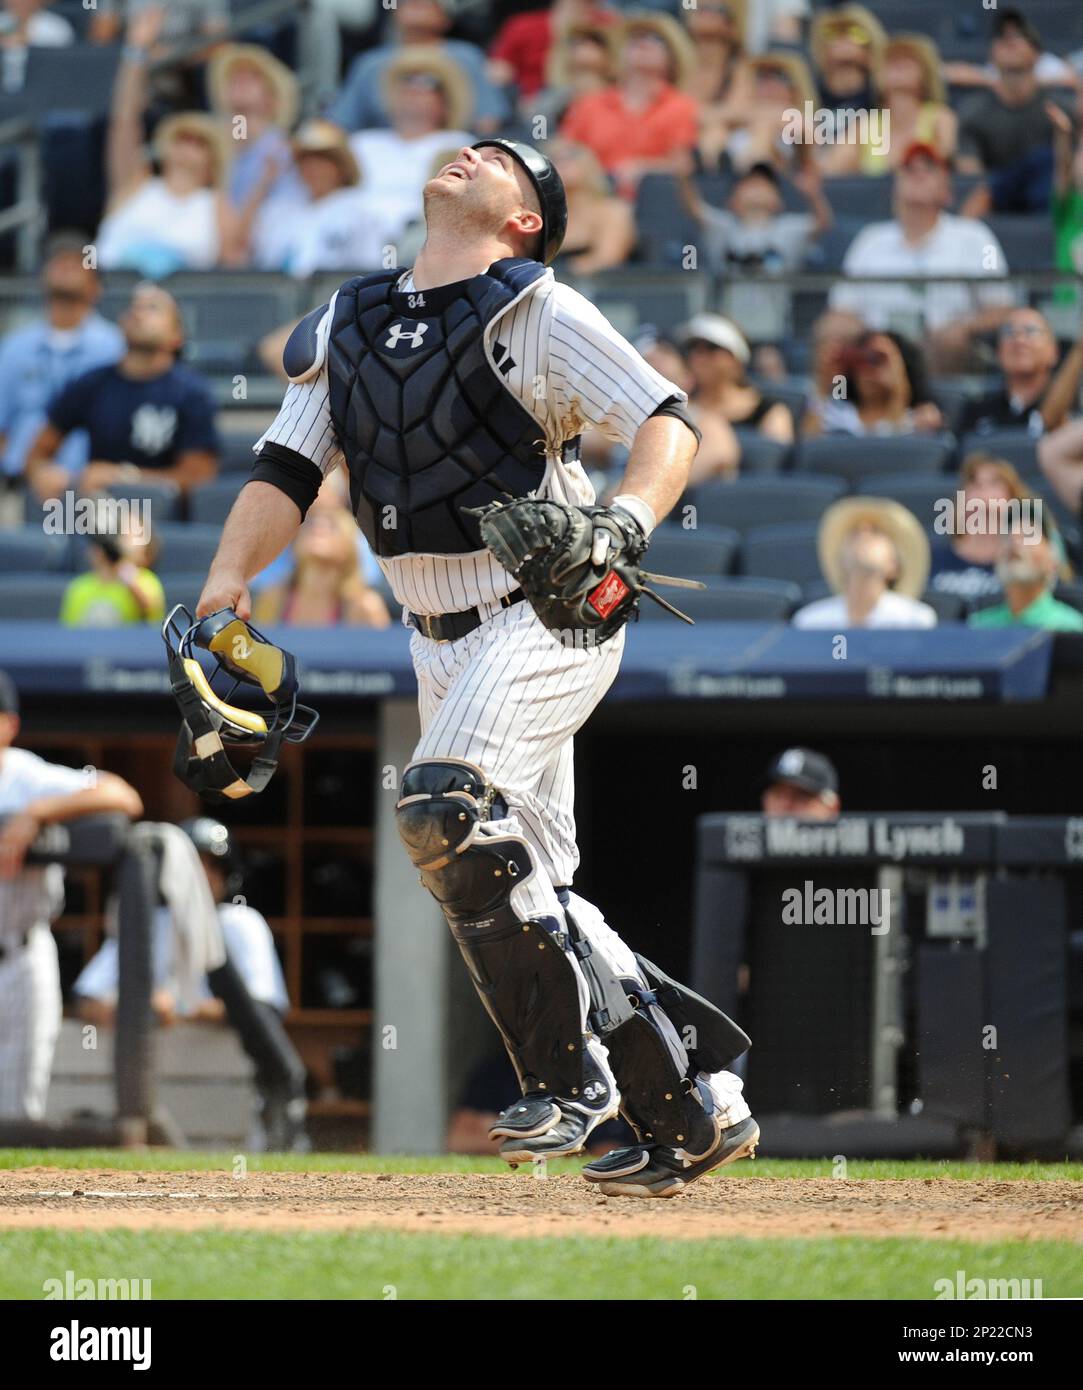 New York Yankees catcher Brian McCann (34) during game against the Toronto  Blue Jays at Yankee